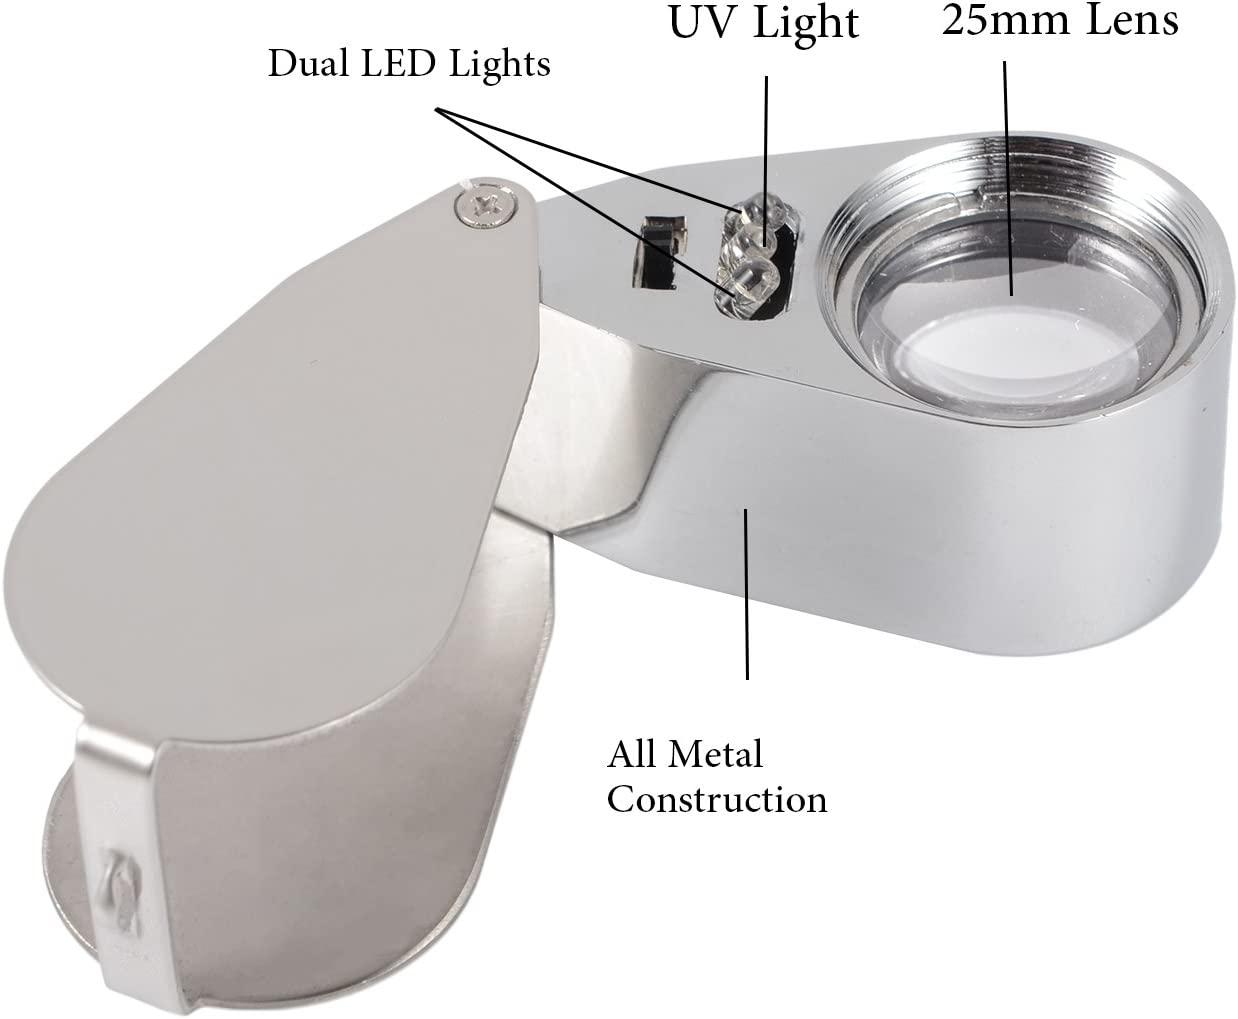 40X Full Metal Illuminated Jewelry Loop Magnifier,Delixike Pocket Folding  Magnifying Glass Jewelers Eye Loupe with LED Light(LED Currency